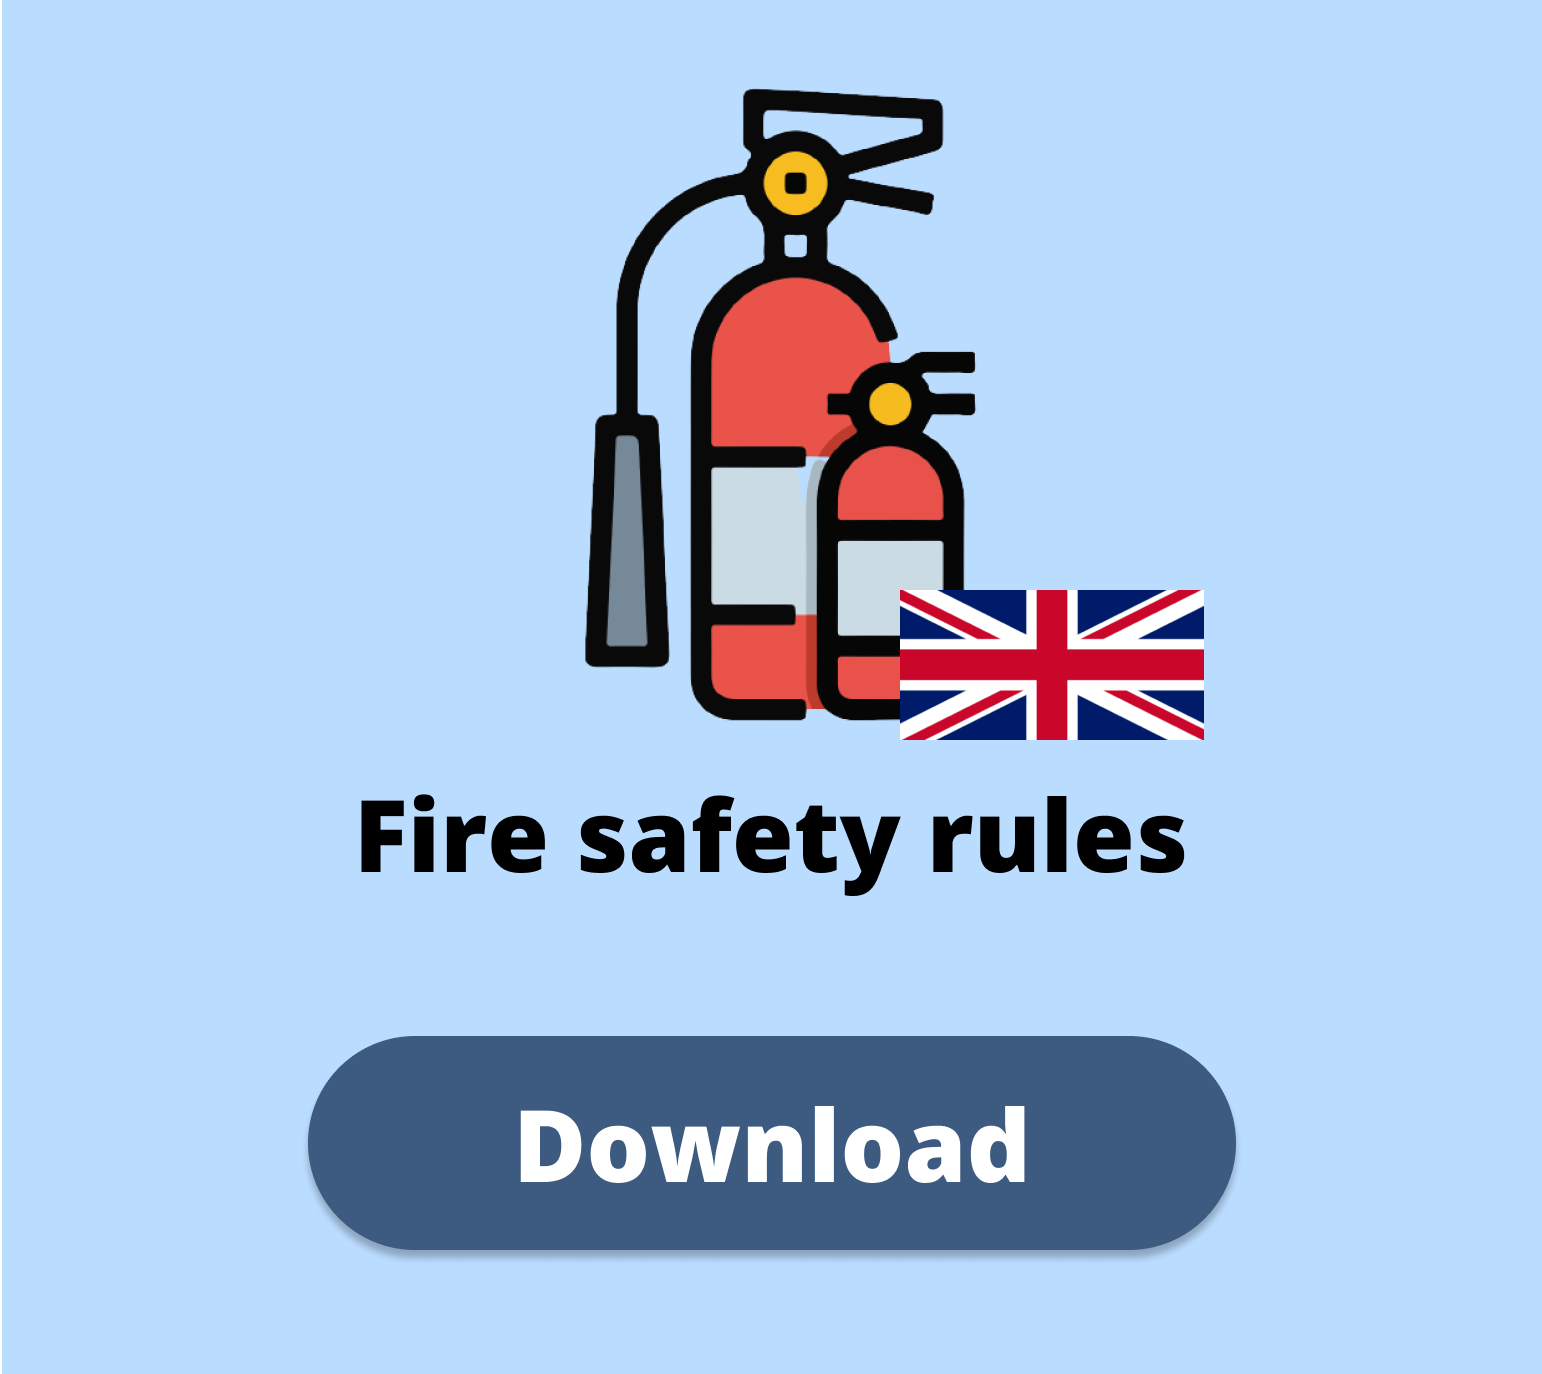 Fire safety rules